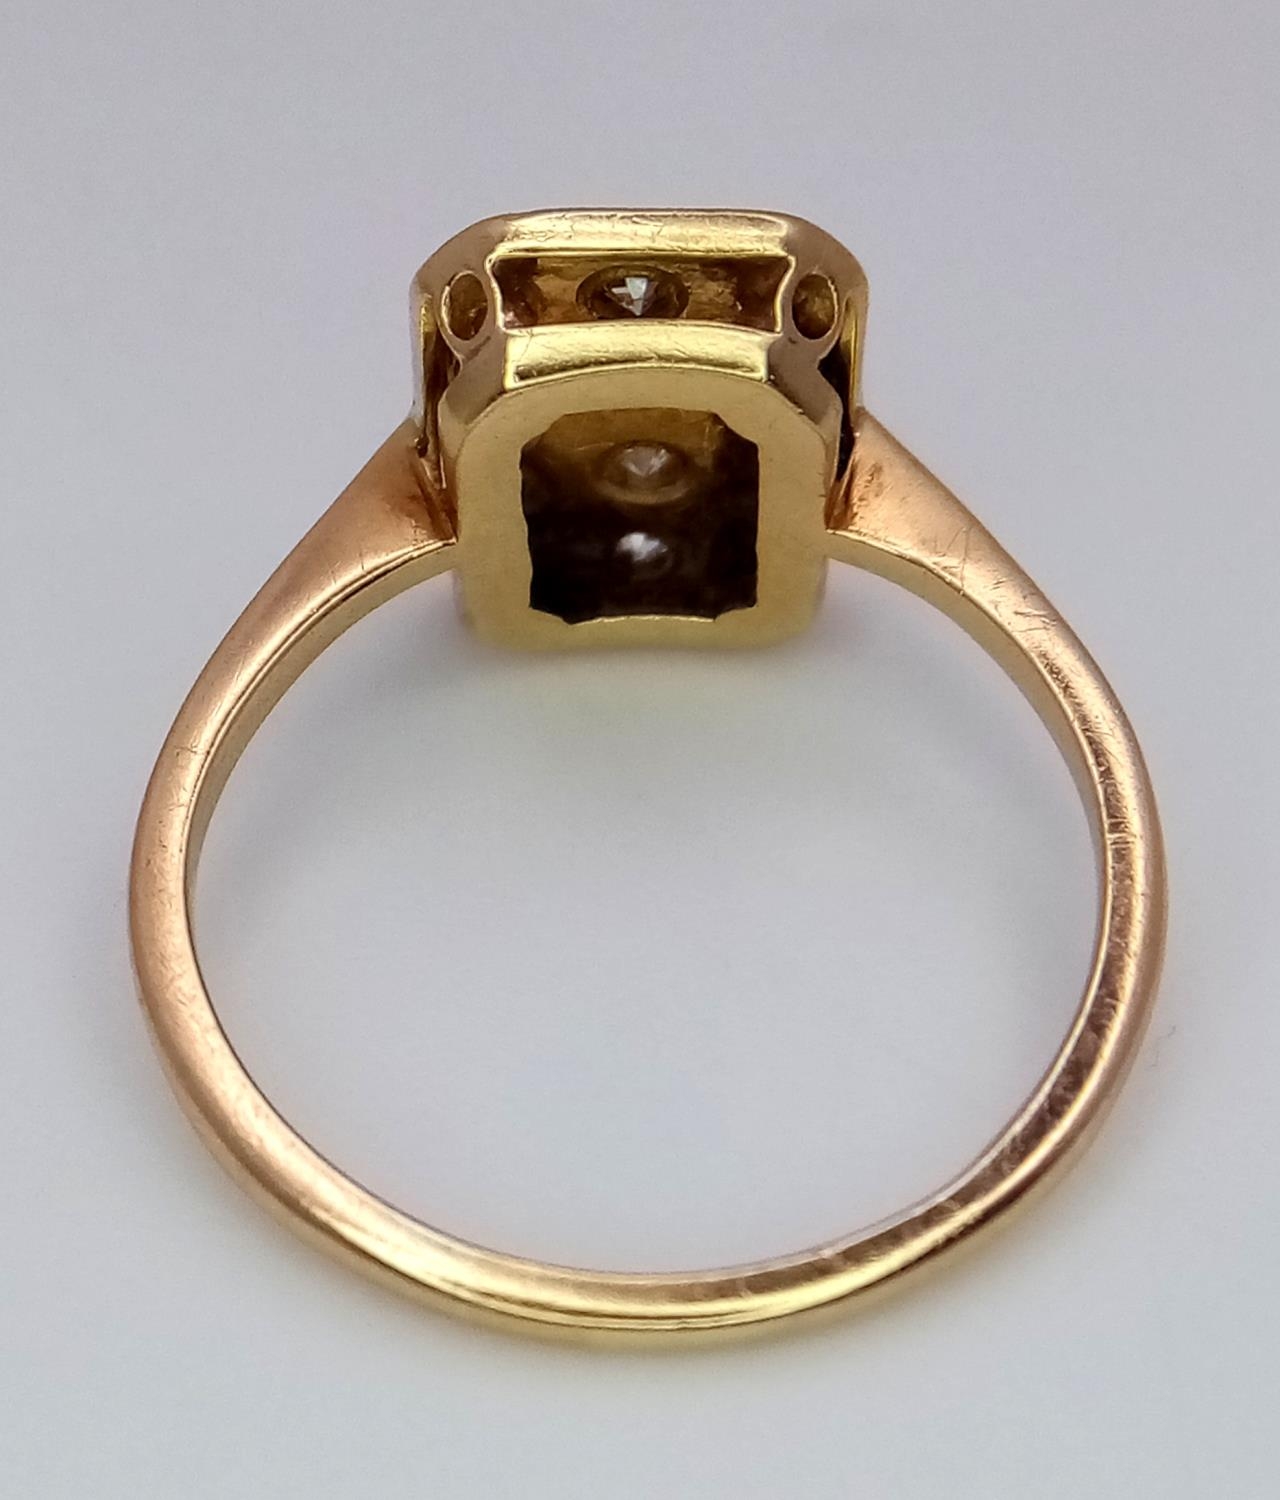 AN 18K YELLOW GOLD & PLATINUM VINTAGE DIAMOND RING. 0.20ctw, size J, 2.6g total weight. Ref: SC 9035 - Image 4 of 5